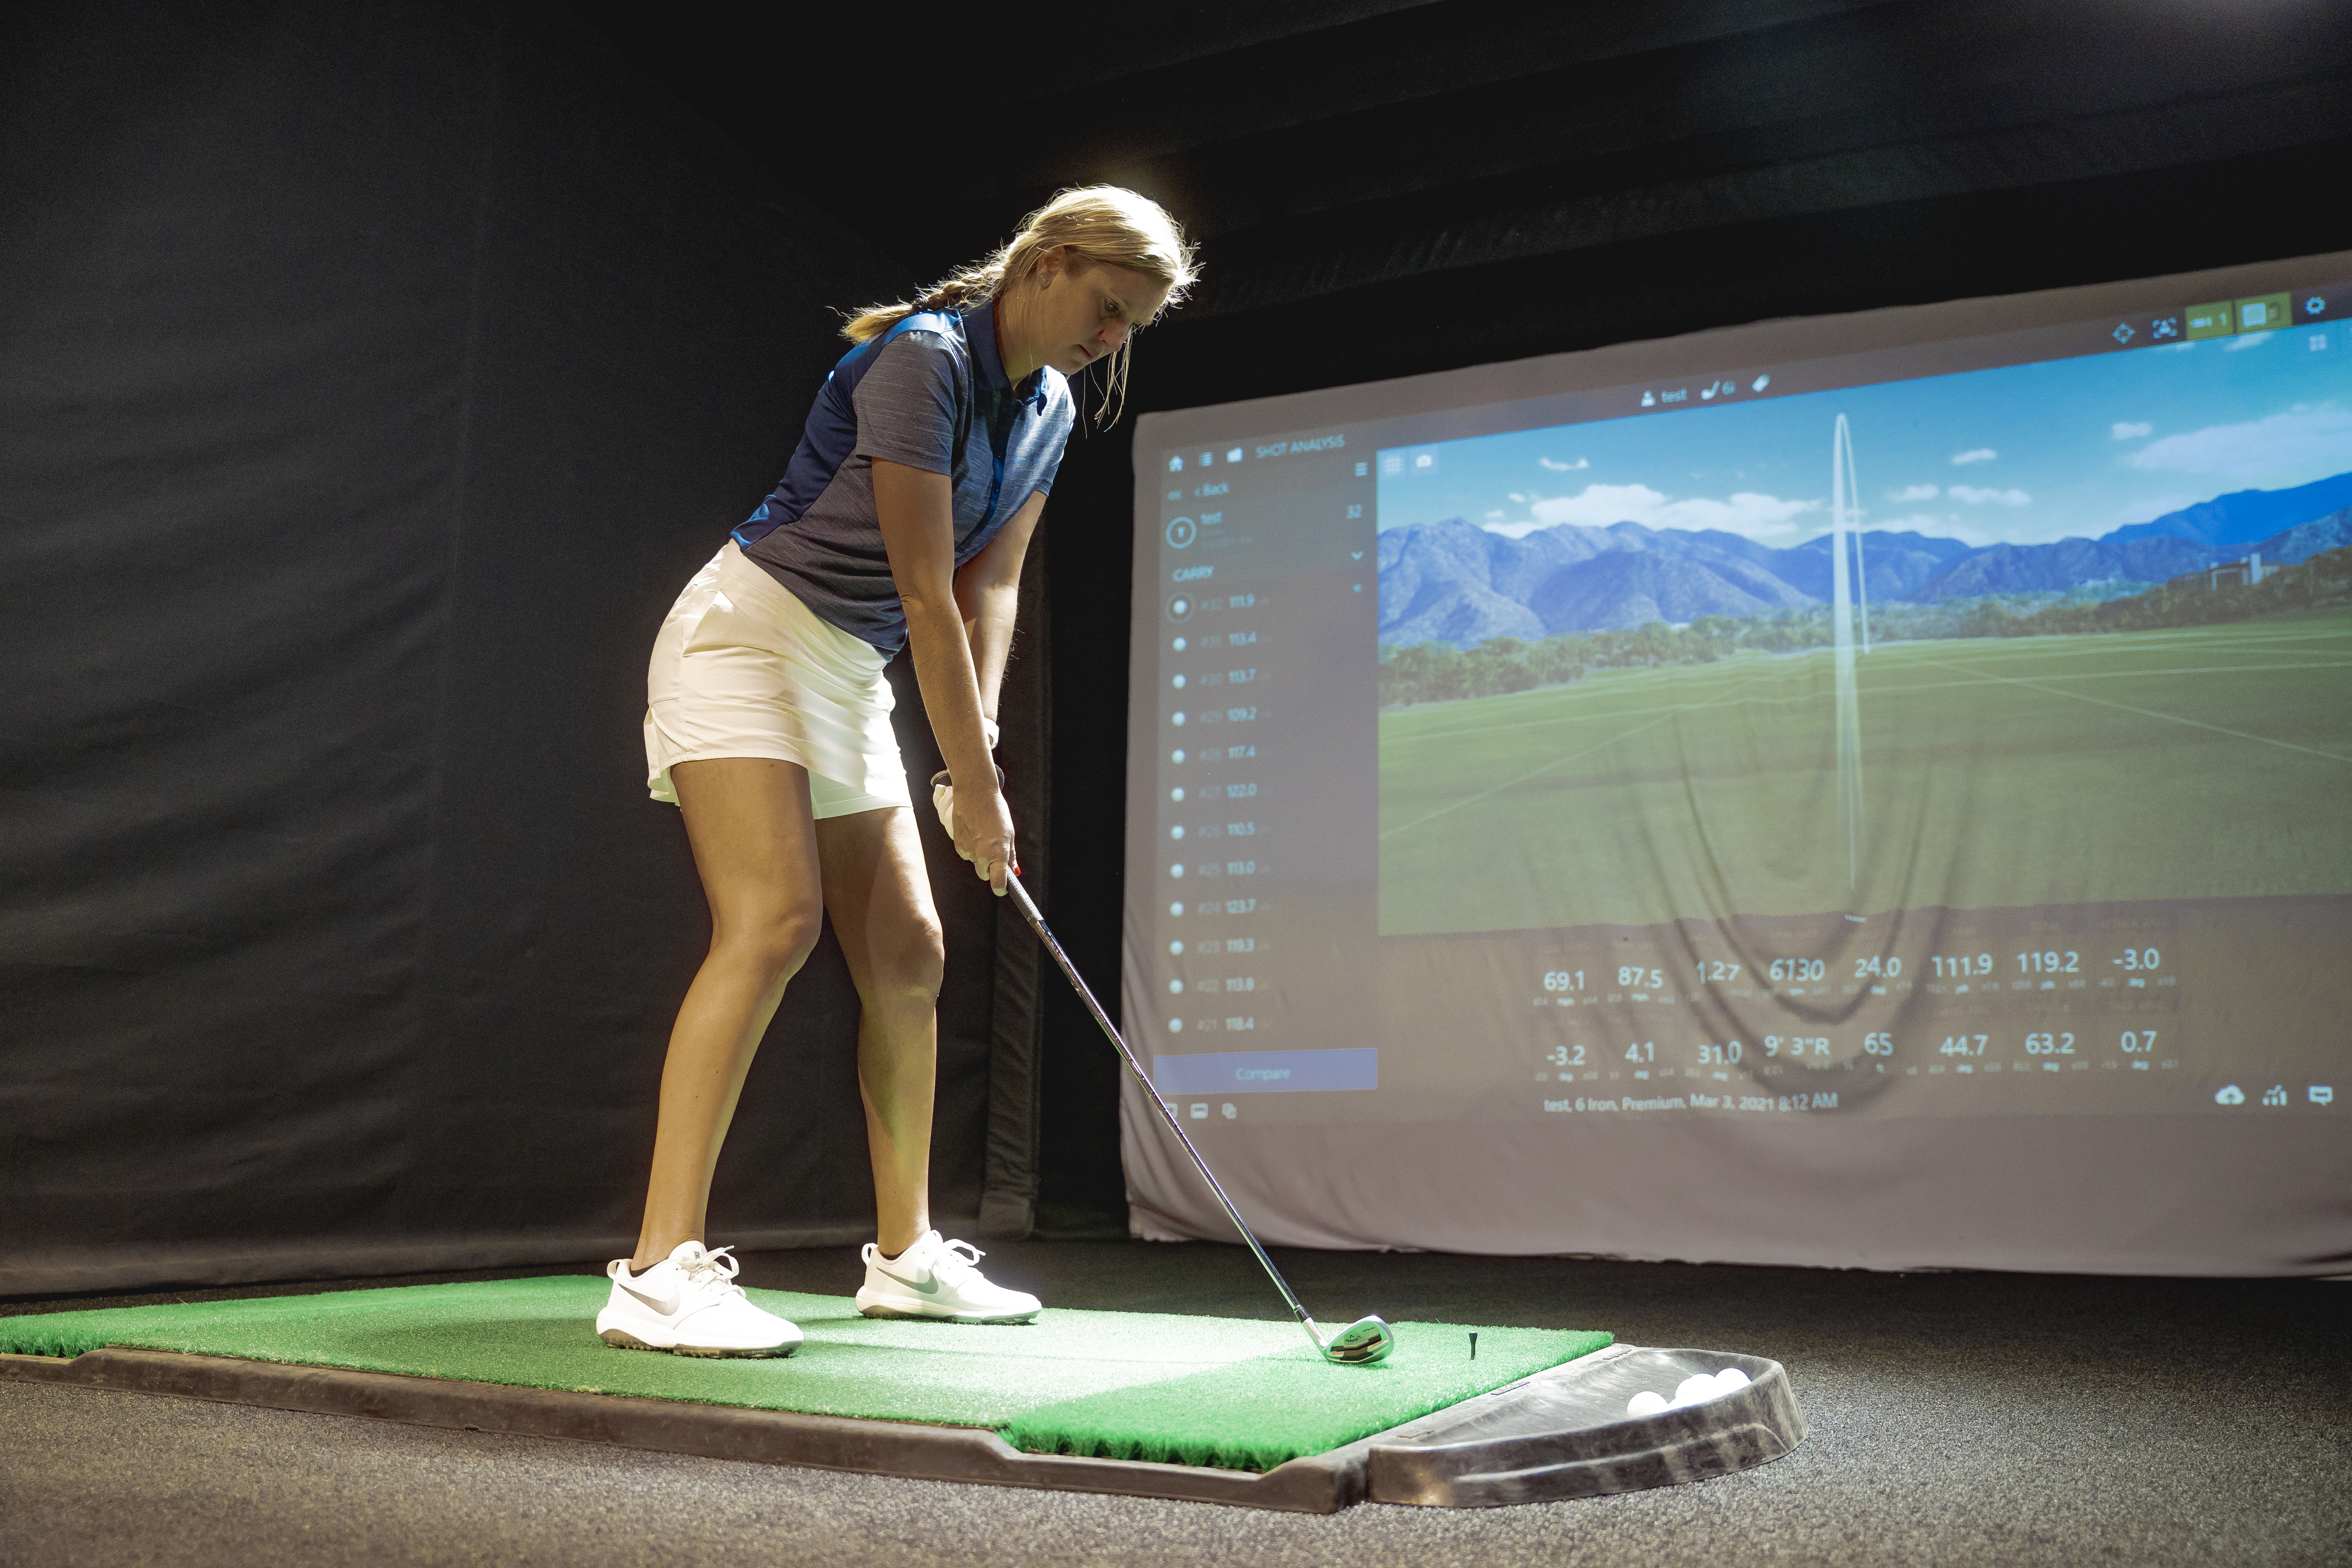 Club fitting 101 How to prepare for a fitting